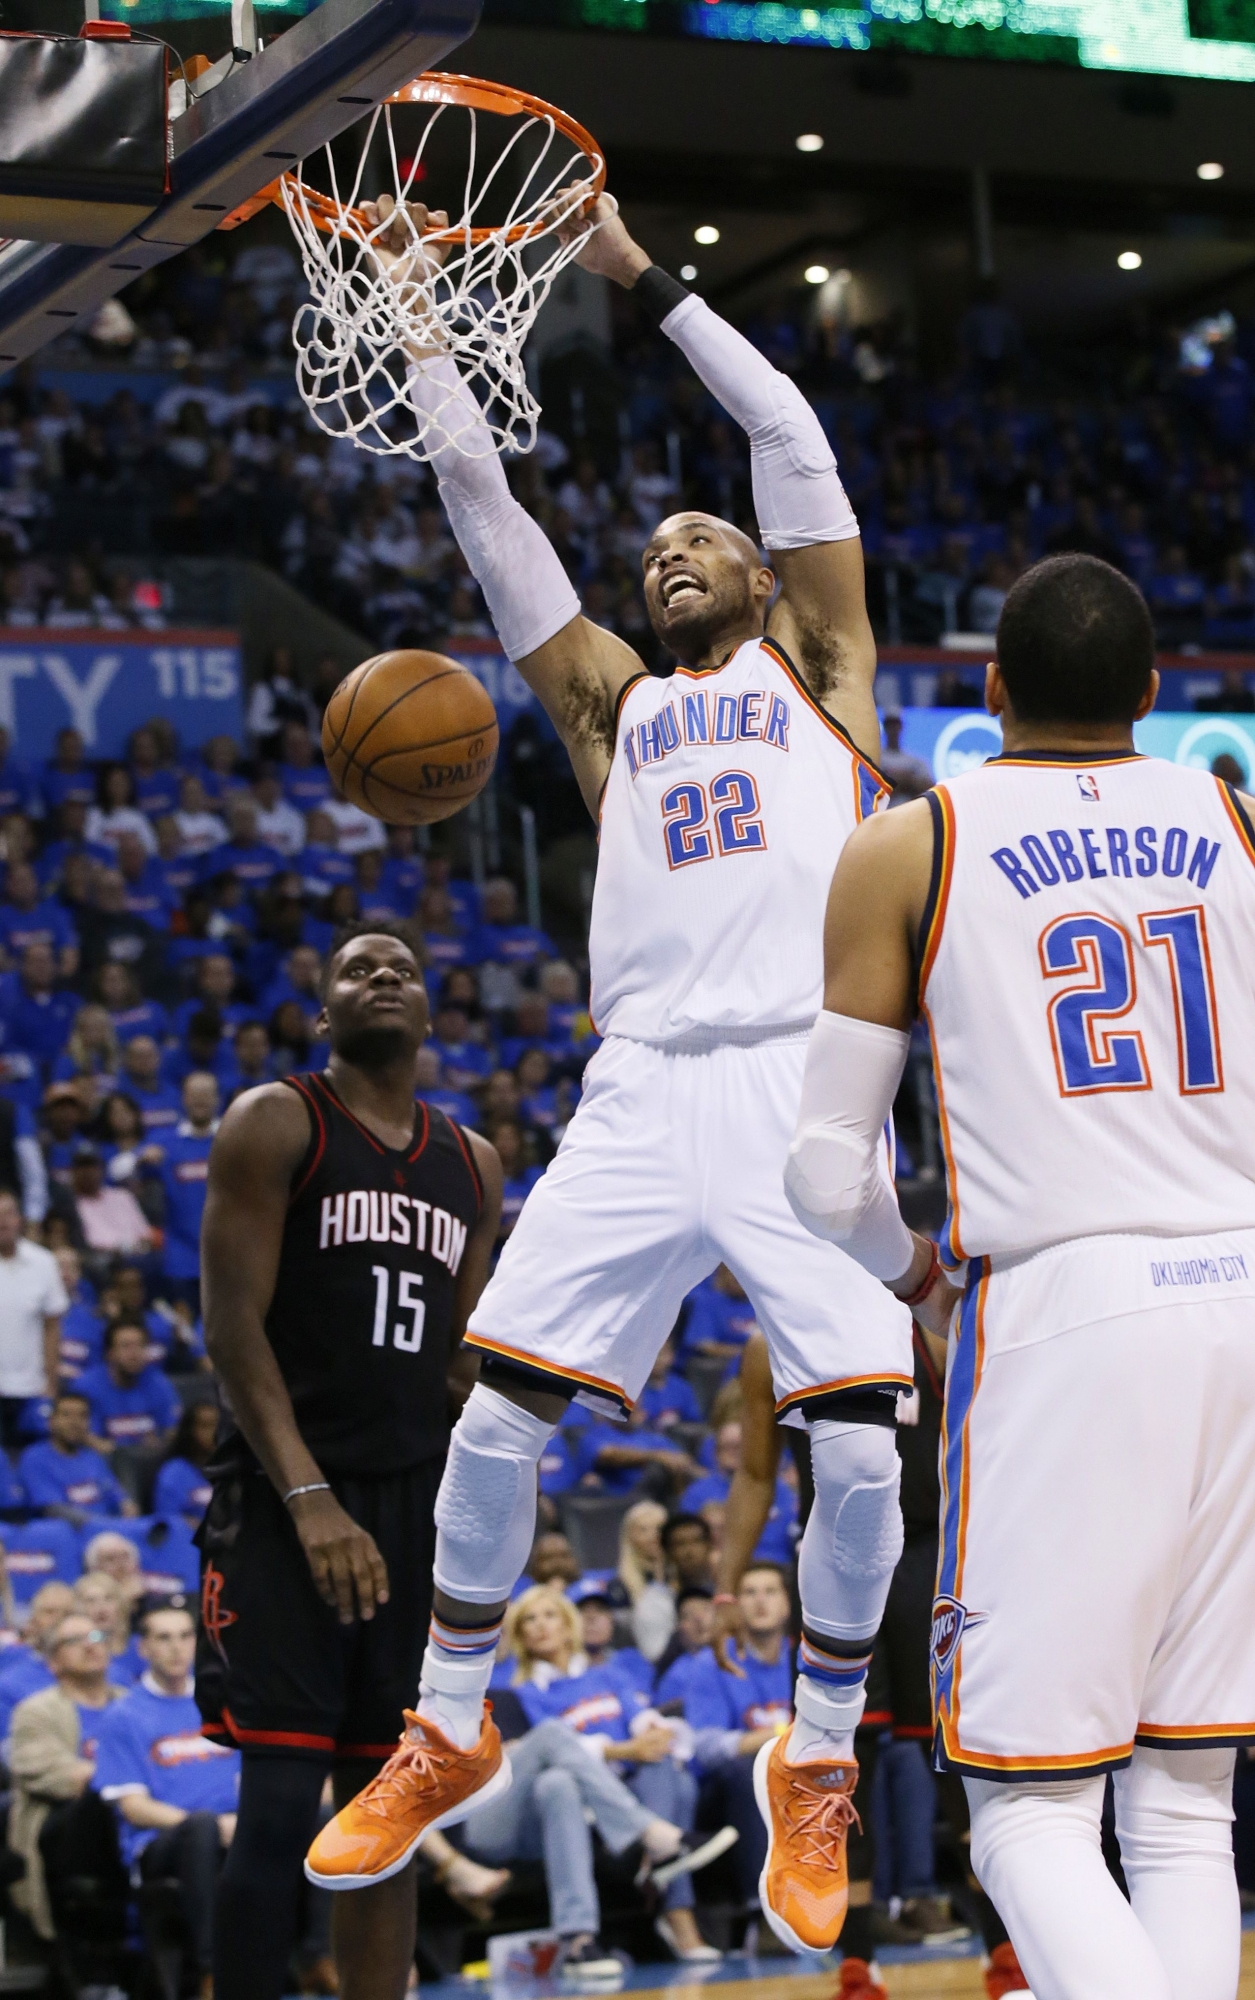 Oklahoma City Thunder forward Taj Gibson (22) dunks in front of Houston Rockets center Clint Capela (15) in the third quarter of Game 3 of a first-round NBA basketball playoff series in Oklahoma City, Friday, April 21, 2017. The move to get 6-foot-9 Gibson is paying dividends and has helped the Thunder get back in the series against the Rockets. (AP Photo/Sue Ogrocki)